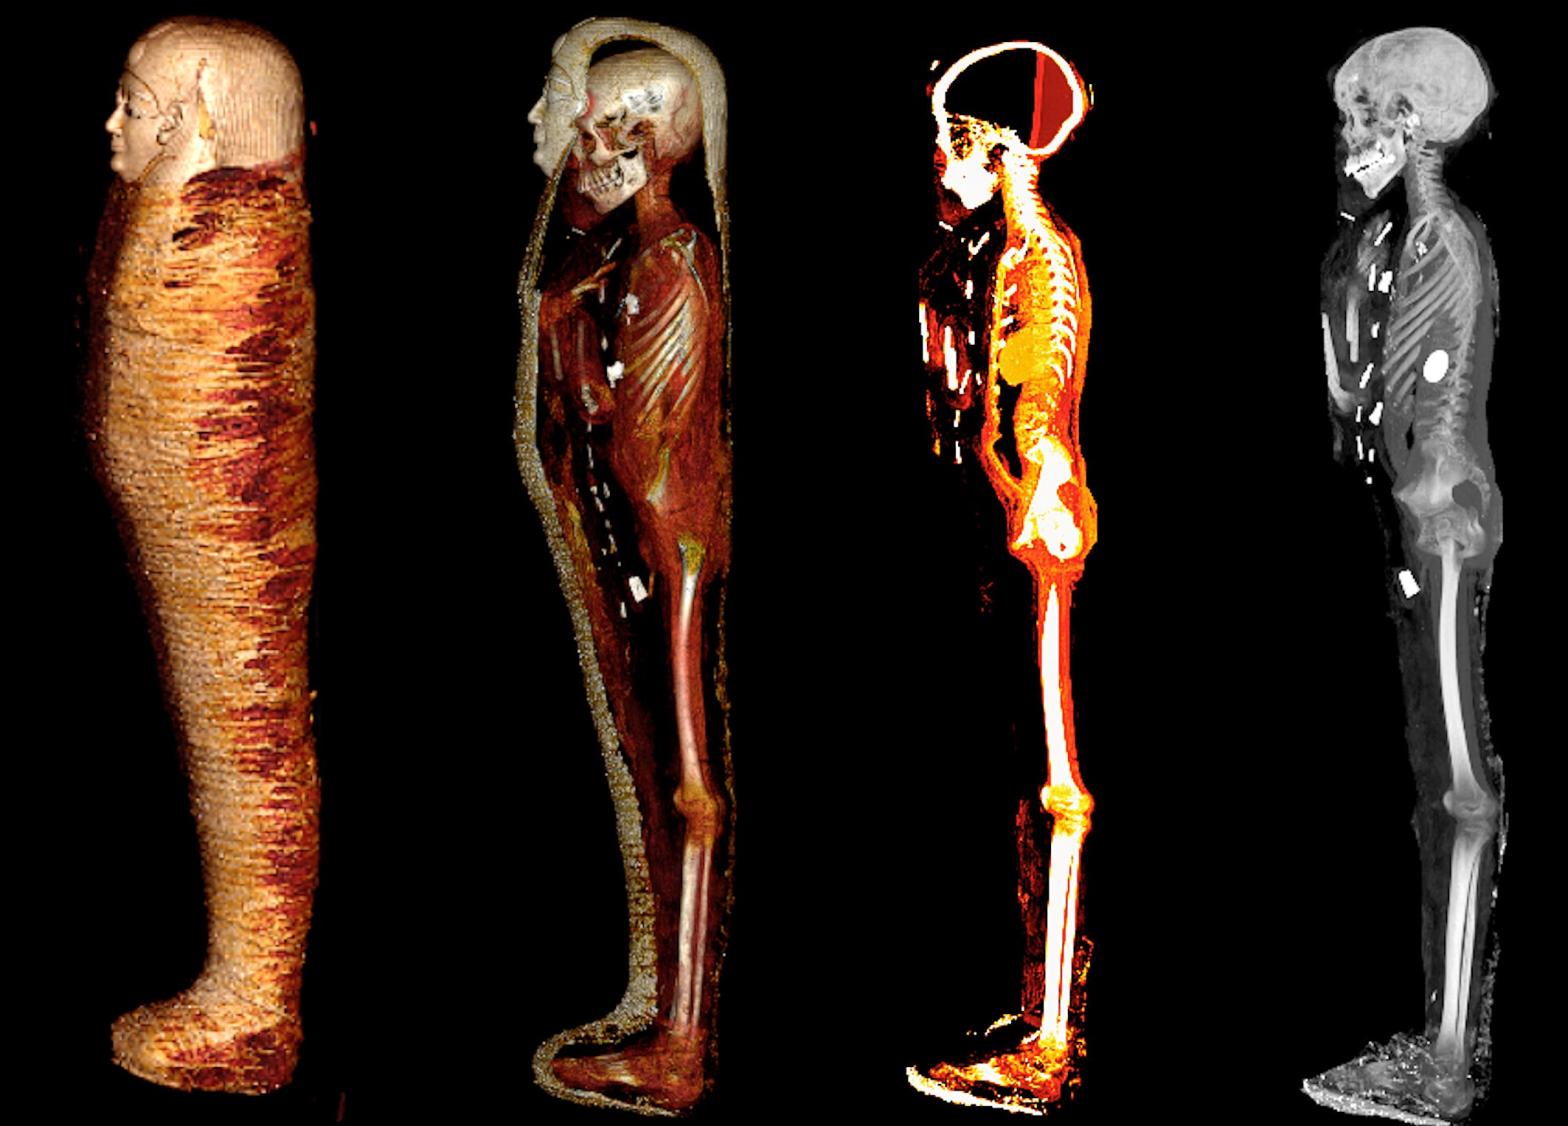 CT scans of the mummy revealed the boy's skeleton and amuluts (white spots on rightmost scan). (Image: SN Saleem, SA Seddik, M el-Halwagy)